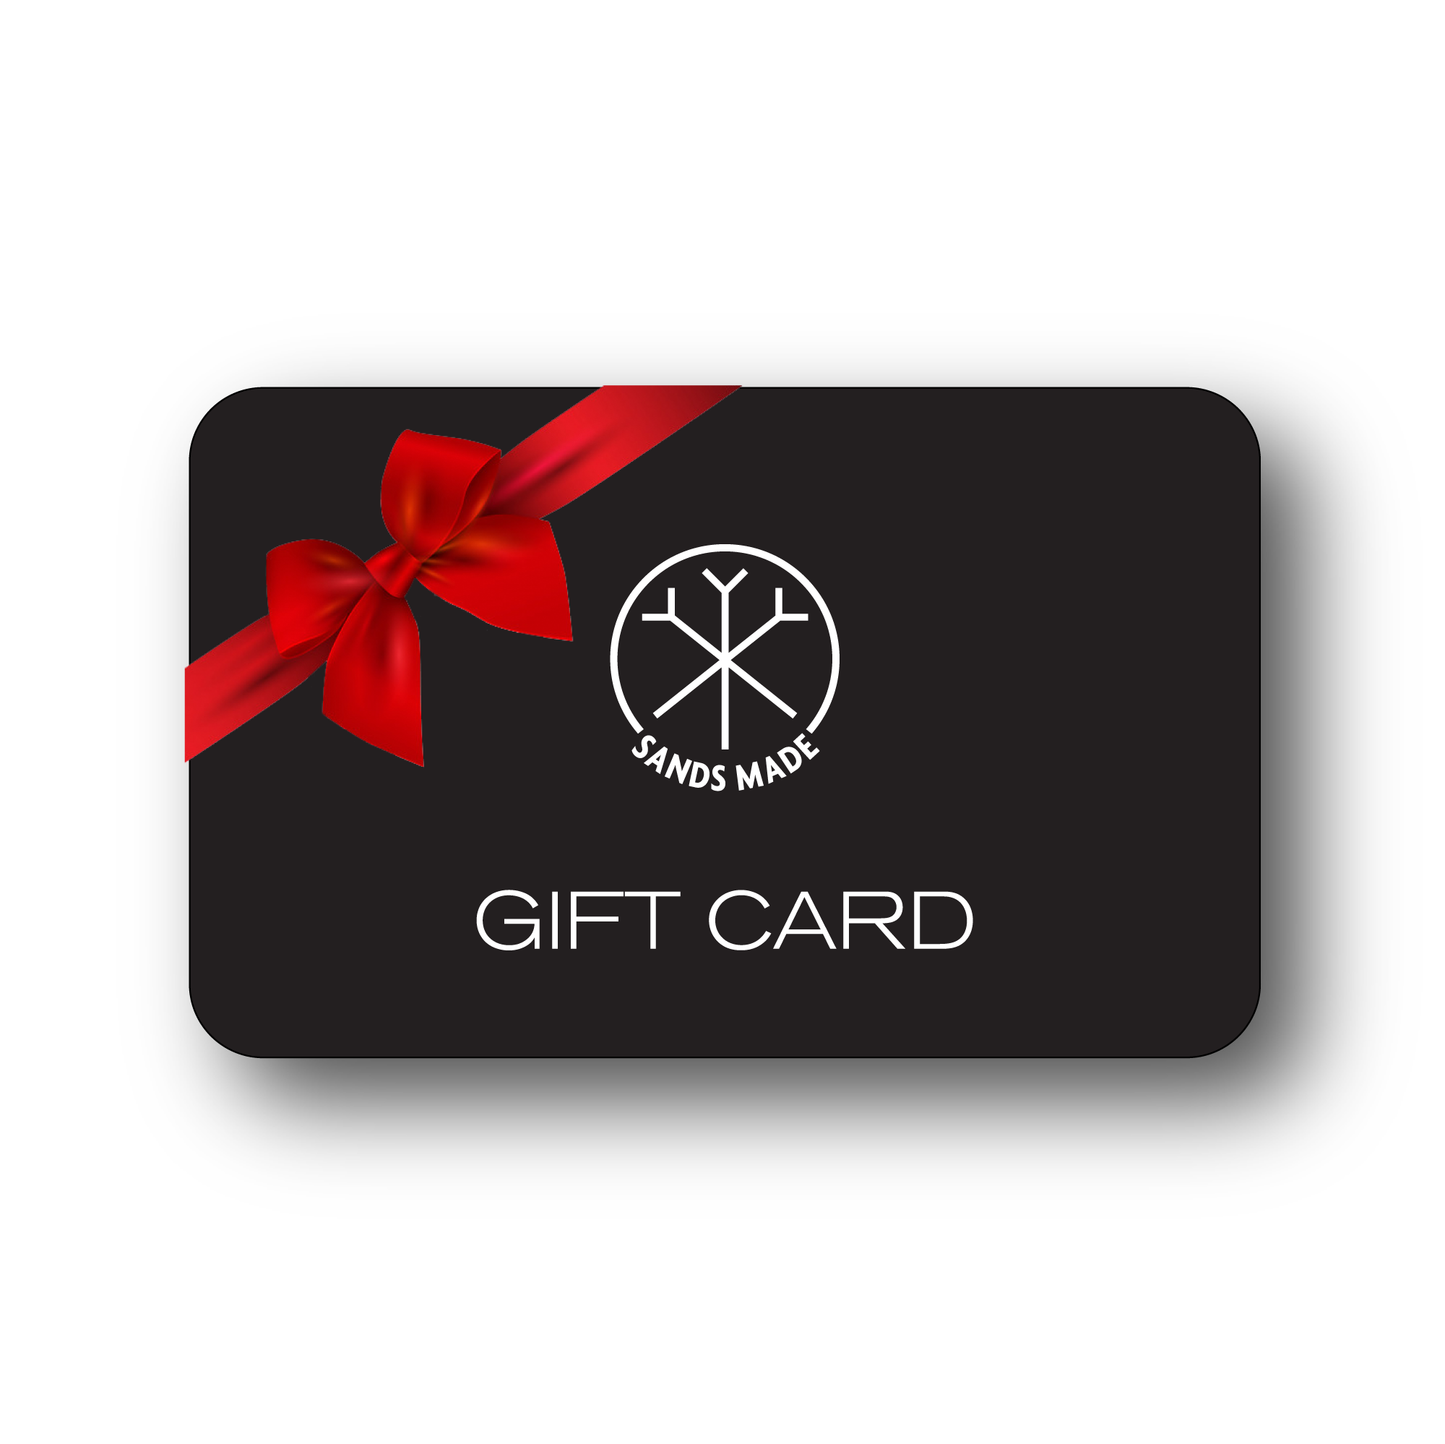 Sands Made Gift Card